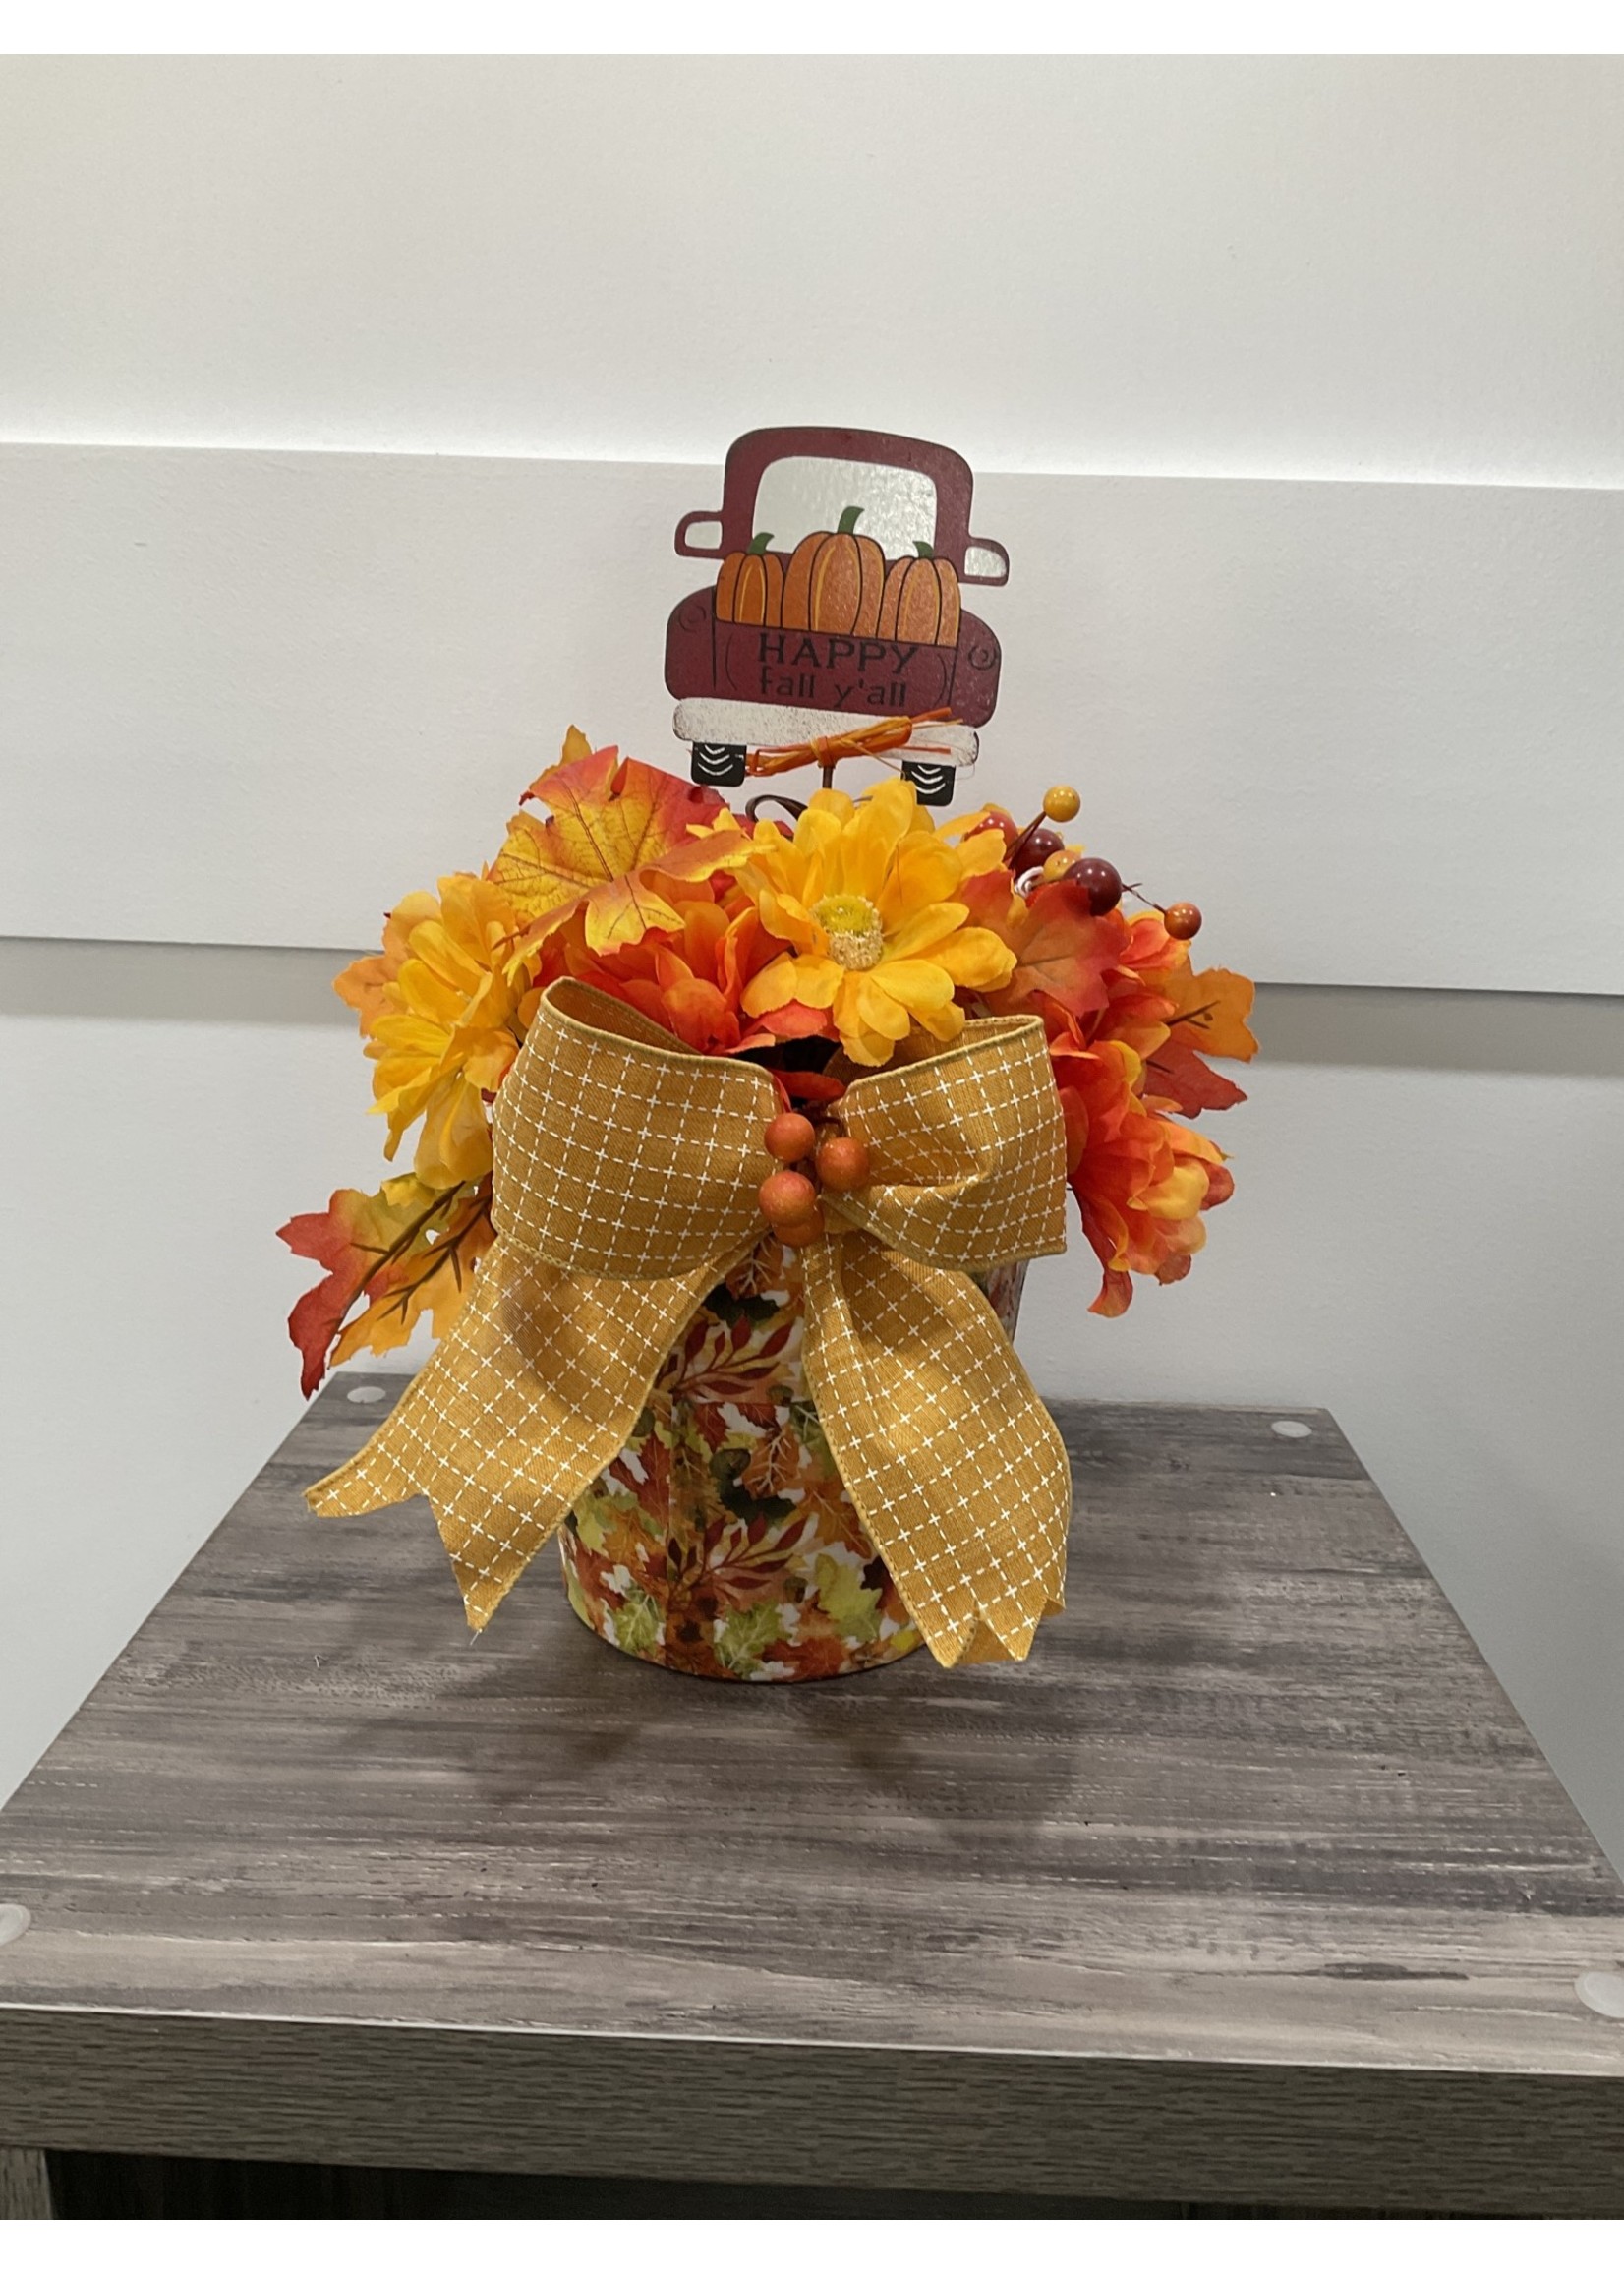 My New Favorite Thing Centerpiece Bouquet Display 10x10x14 Leaf Decoupage Pot w/"Happy Fall Y'All" Truck